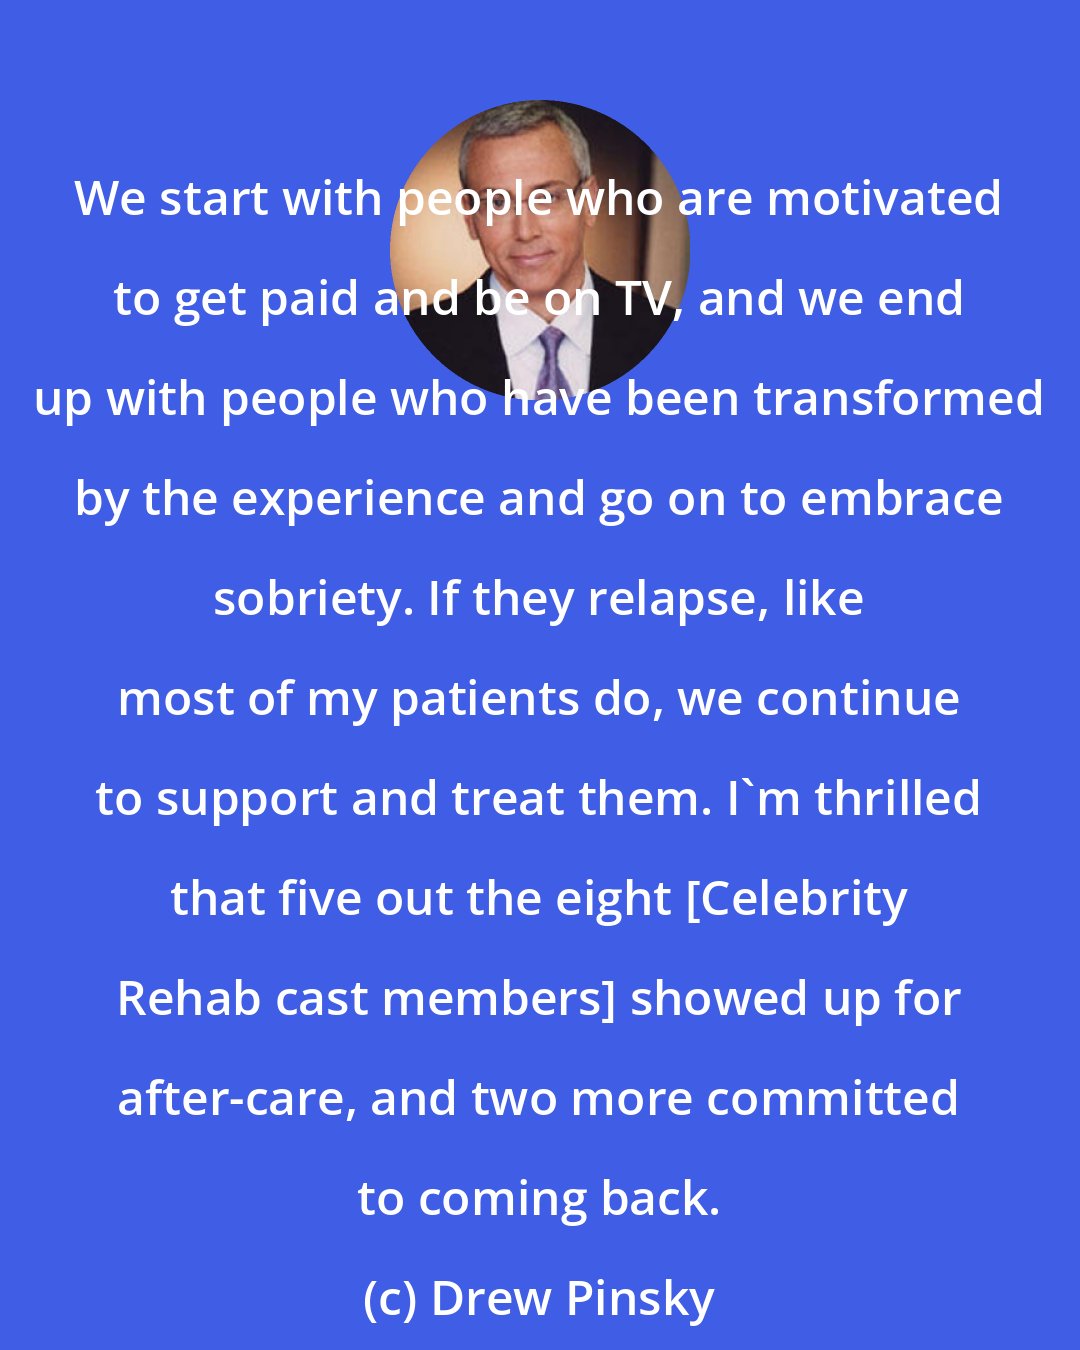 Drew Pinsky: We start with people who are motivated to get paid and be on TV, and we end up with people who have been transformed by the experience and go on to embrace sobriety. If they relapse, like most of my patients do, we continue to support and treat them. I'm thrilled that five out the eight [Celebrity Rehab cast members] showed up for after-care, and two more committed to coming back.